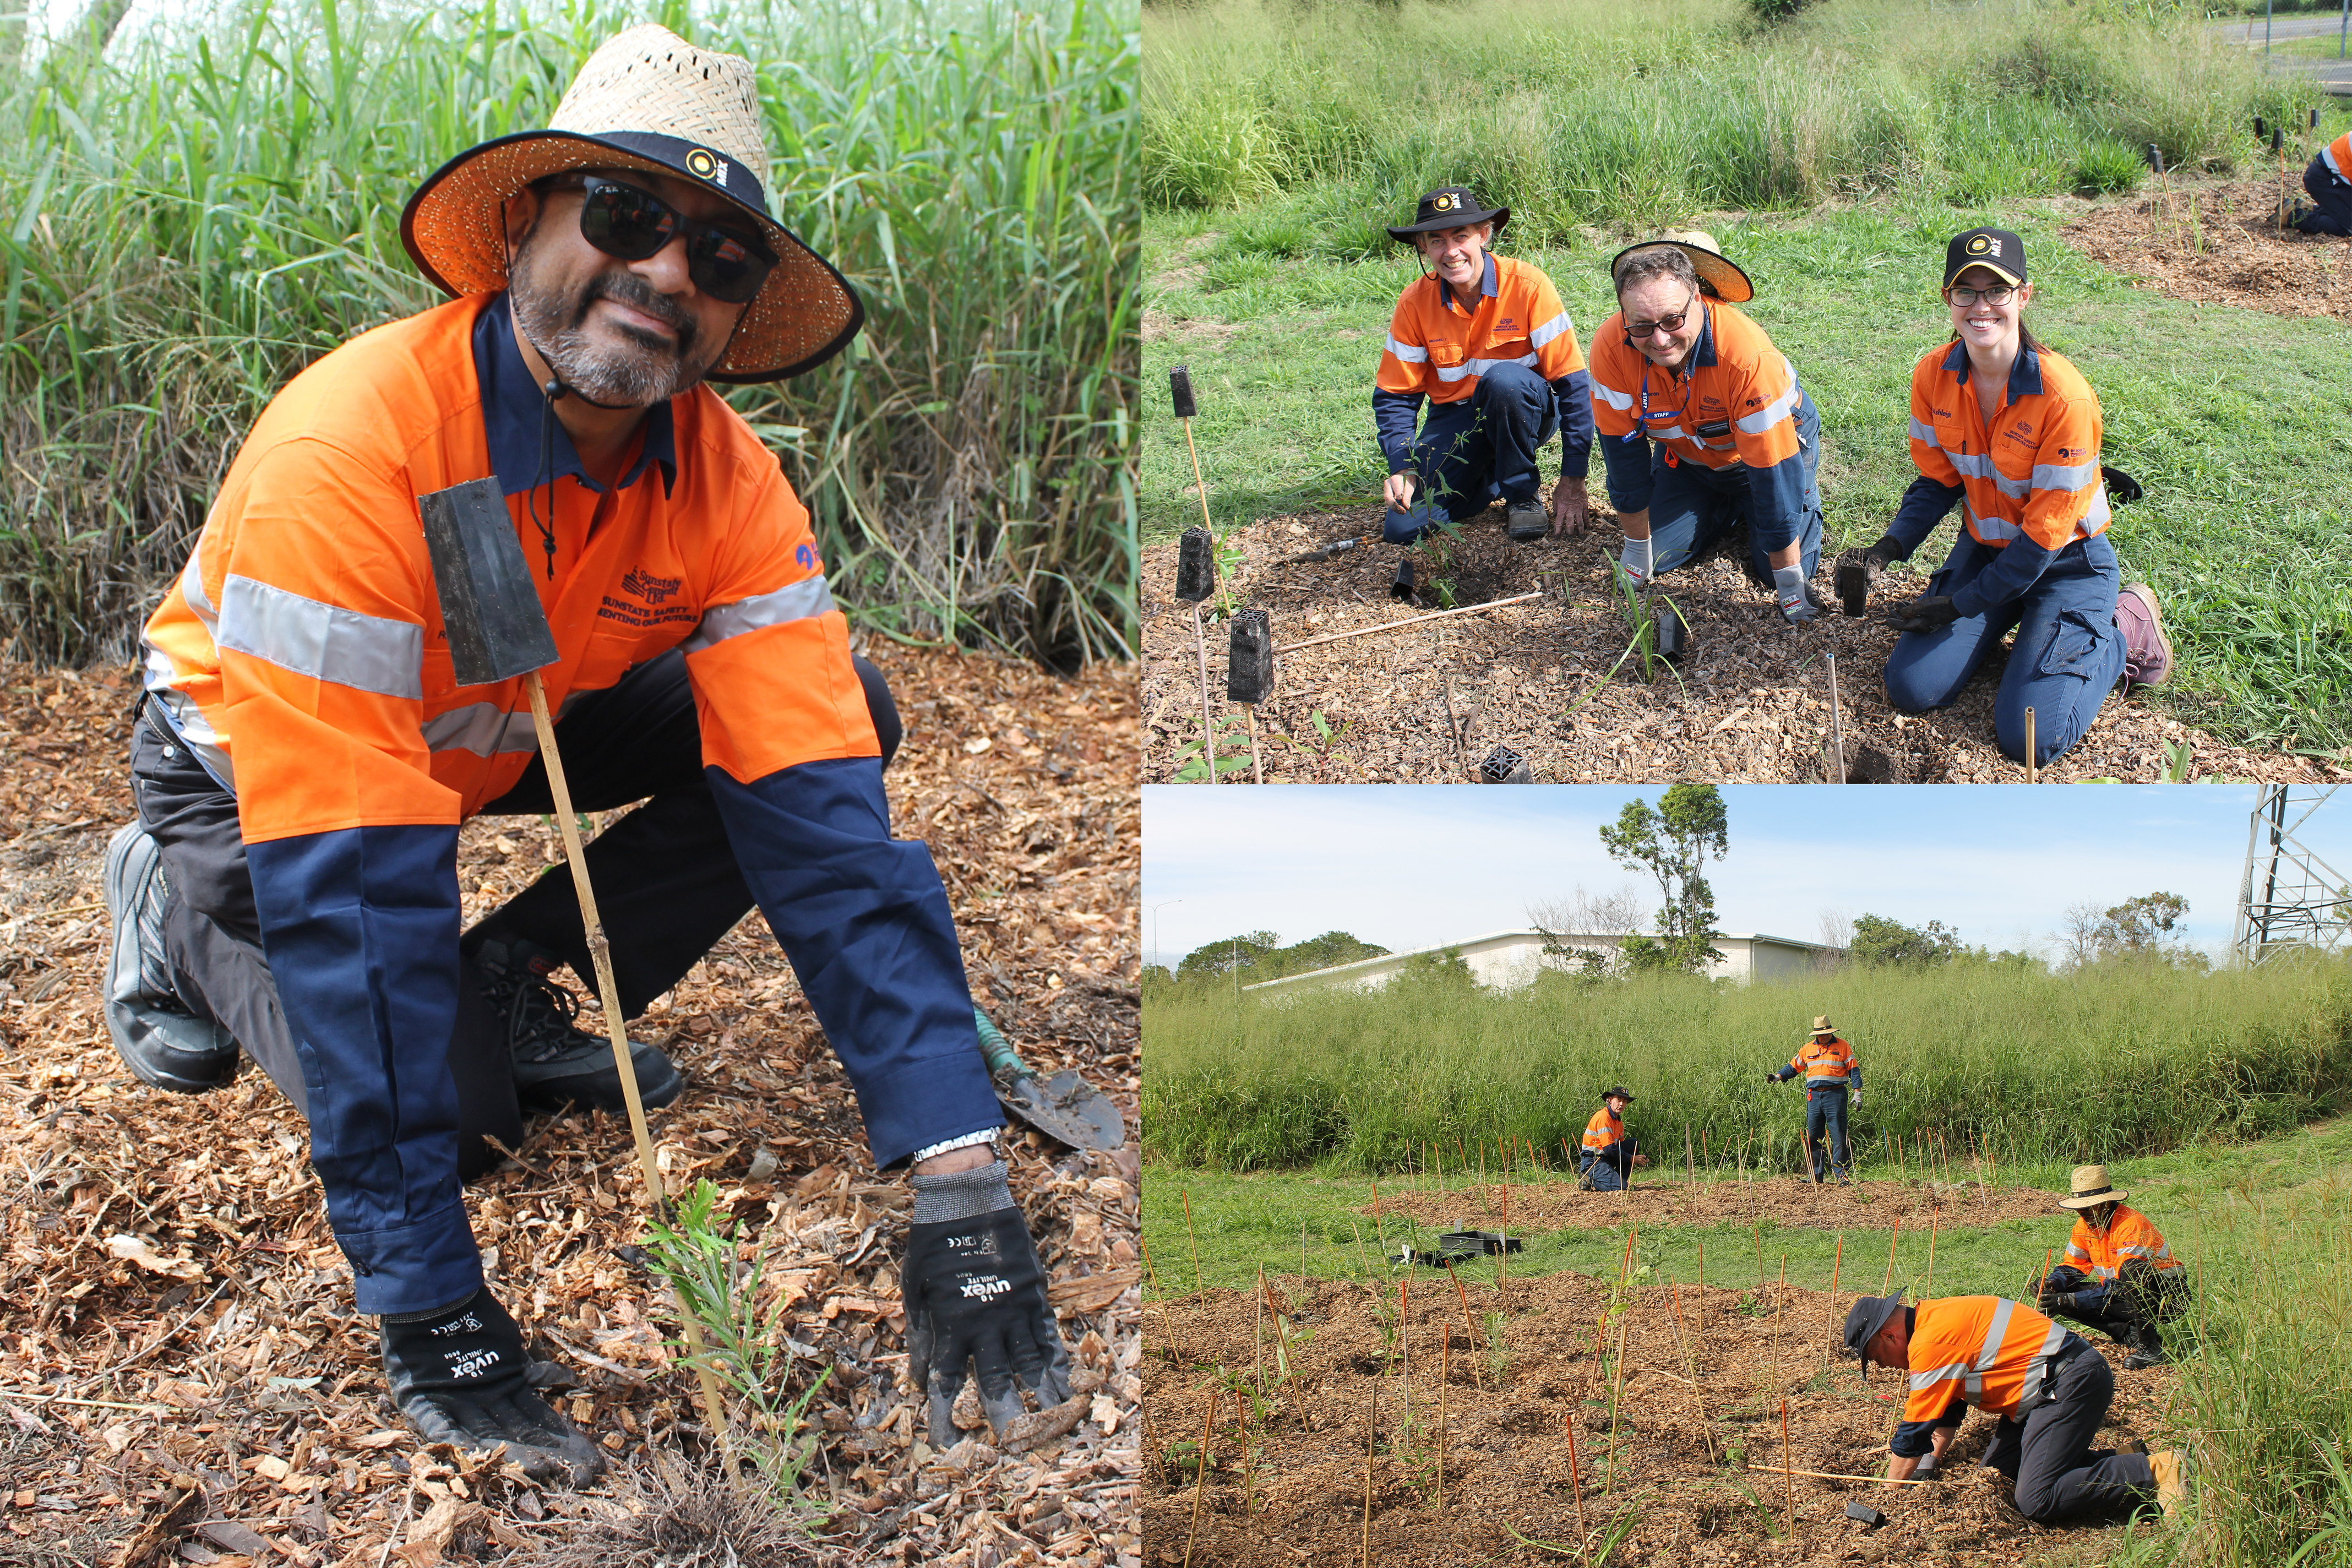 The Sunstate Cement volunteer team - planting trees for Earth Day 2019